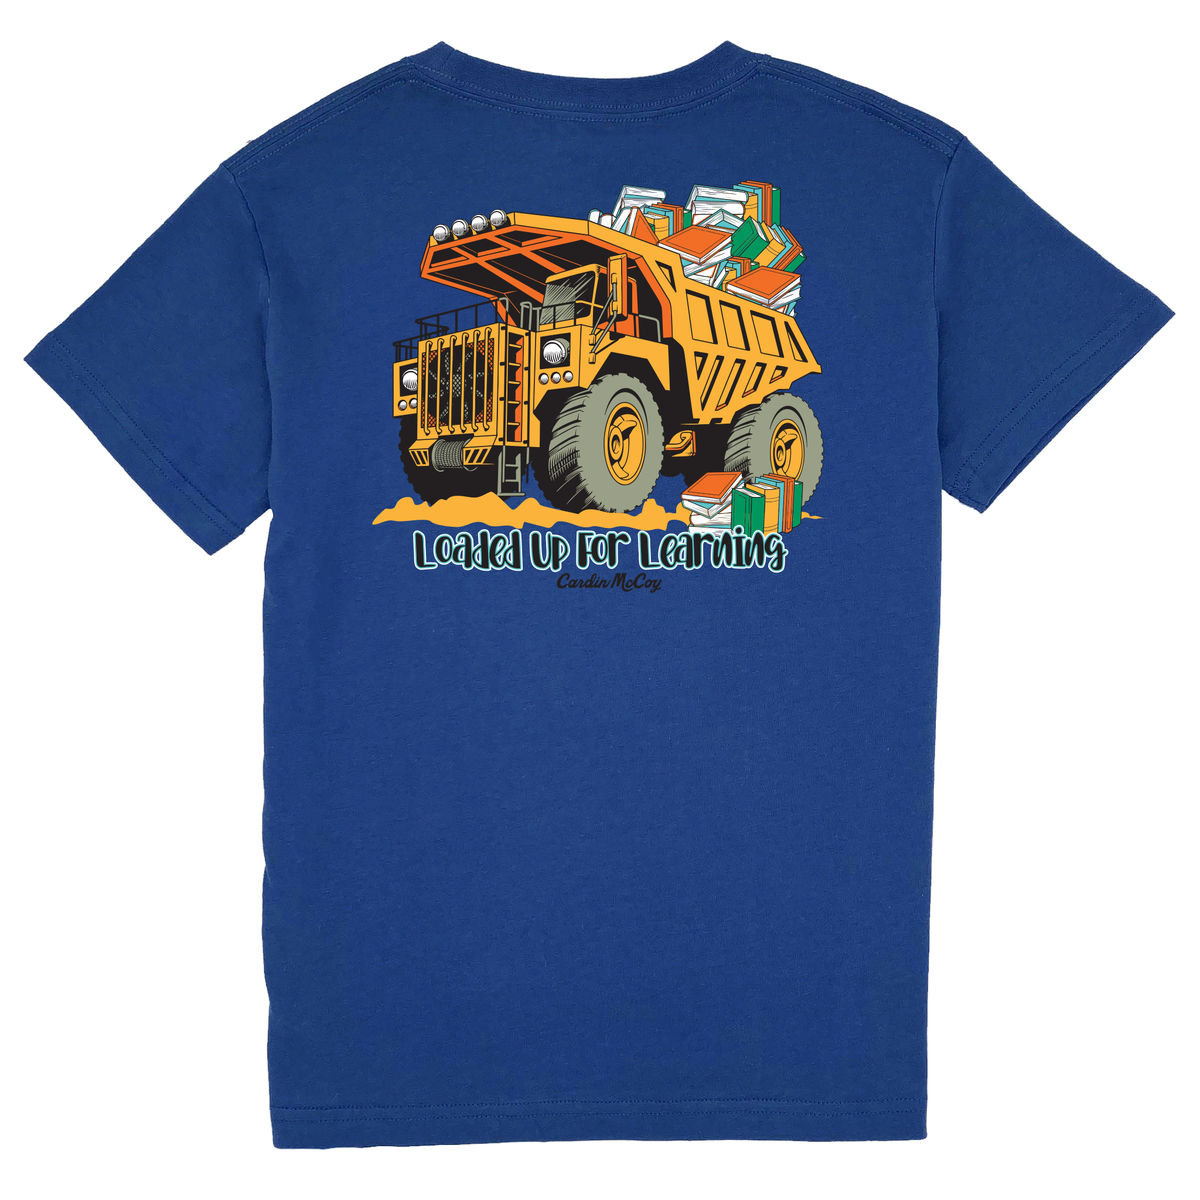 Kids' Loaded Up For Learning Short Sleeve Tee